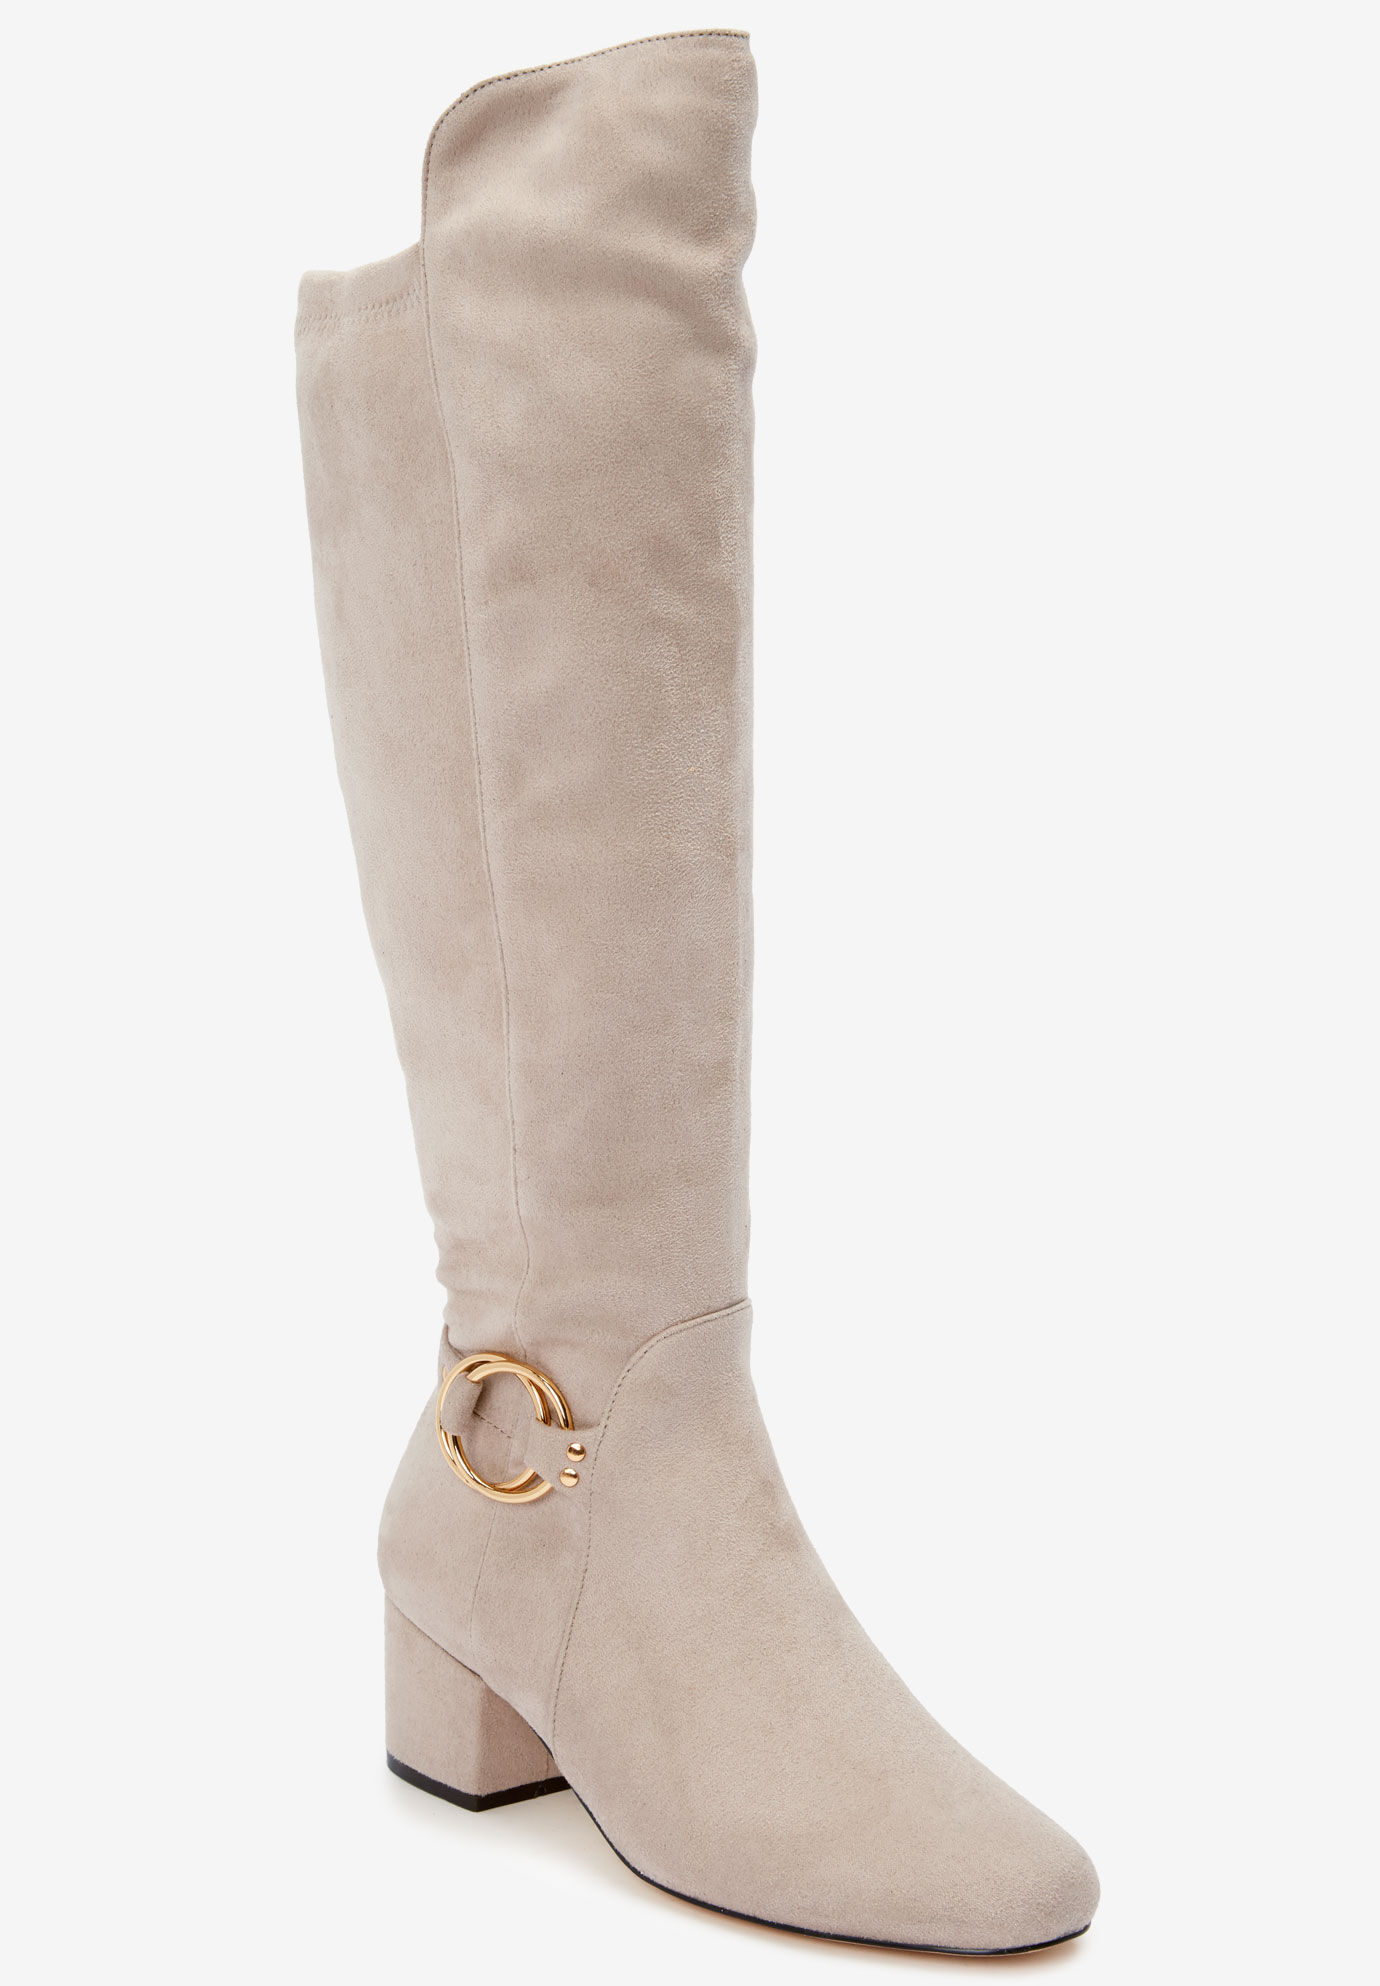 The Ruthie Wide Calf Boot | Roaman's